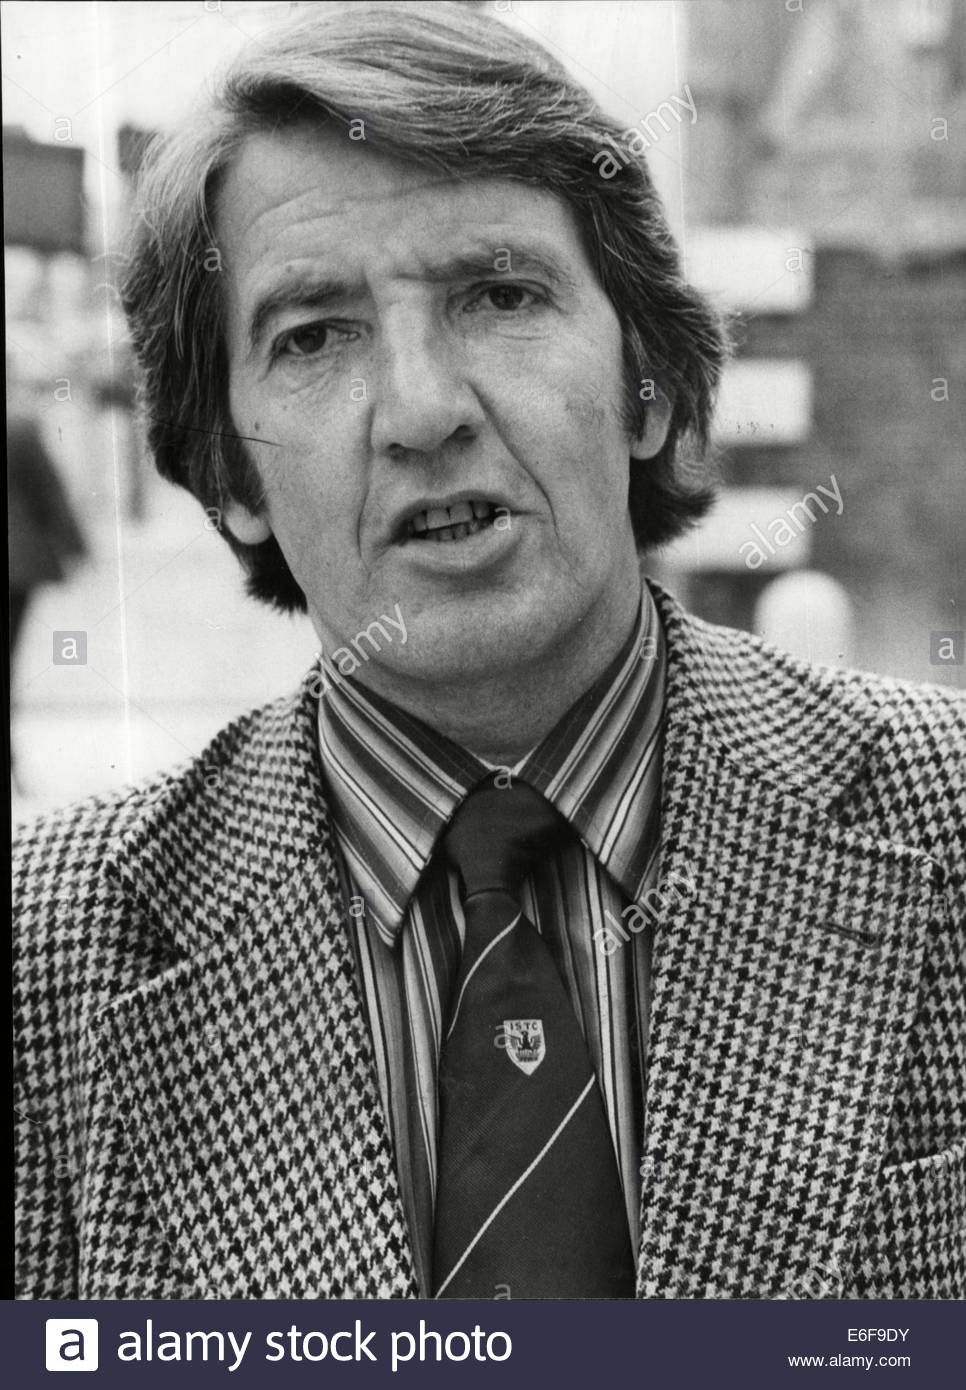 Dennis Skinner Labour M.p. PERSONALITY EIGHTIES - Stock Image - dennis-skinner-labour-mp-personality-eighties-E6F9DY